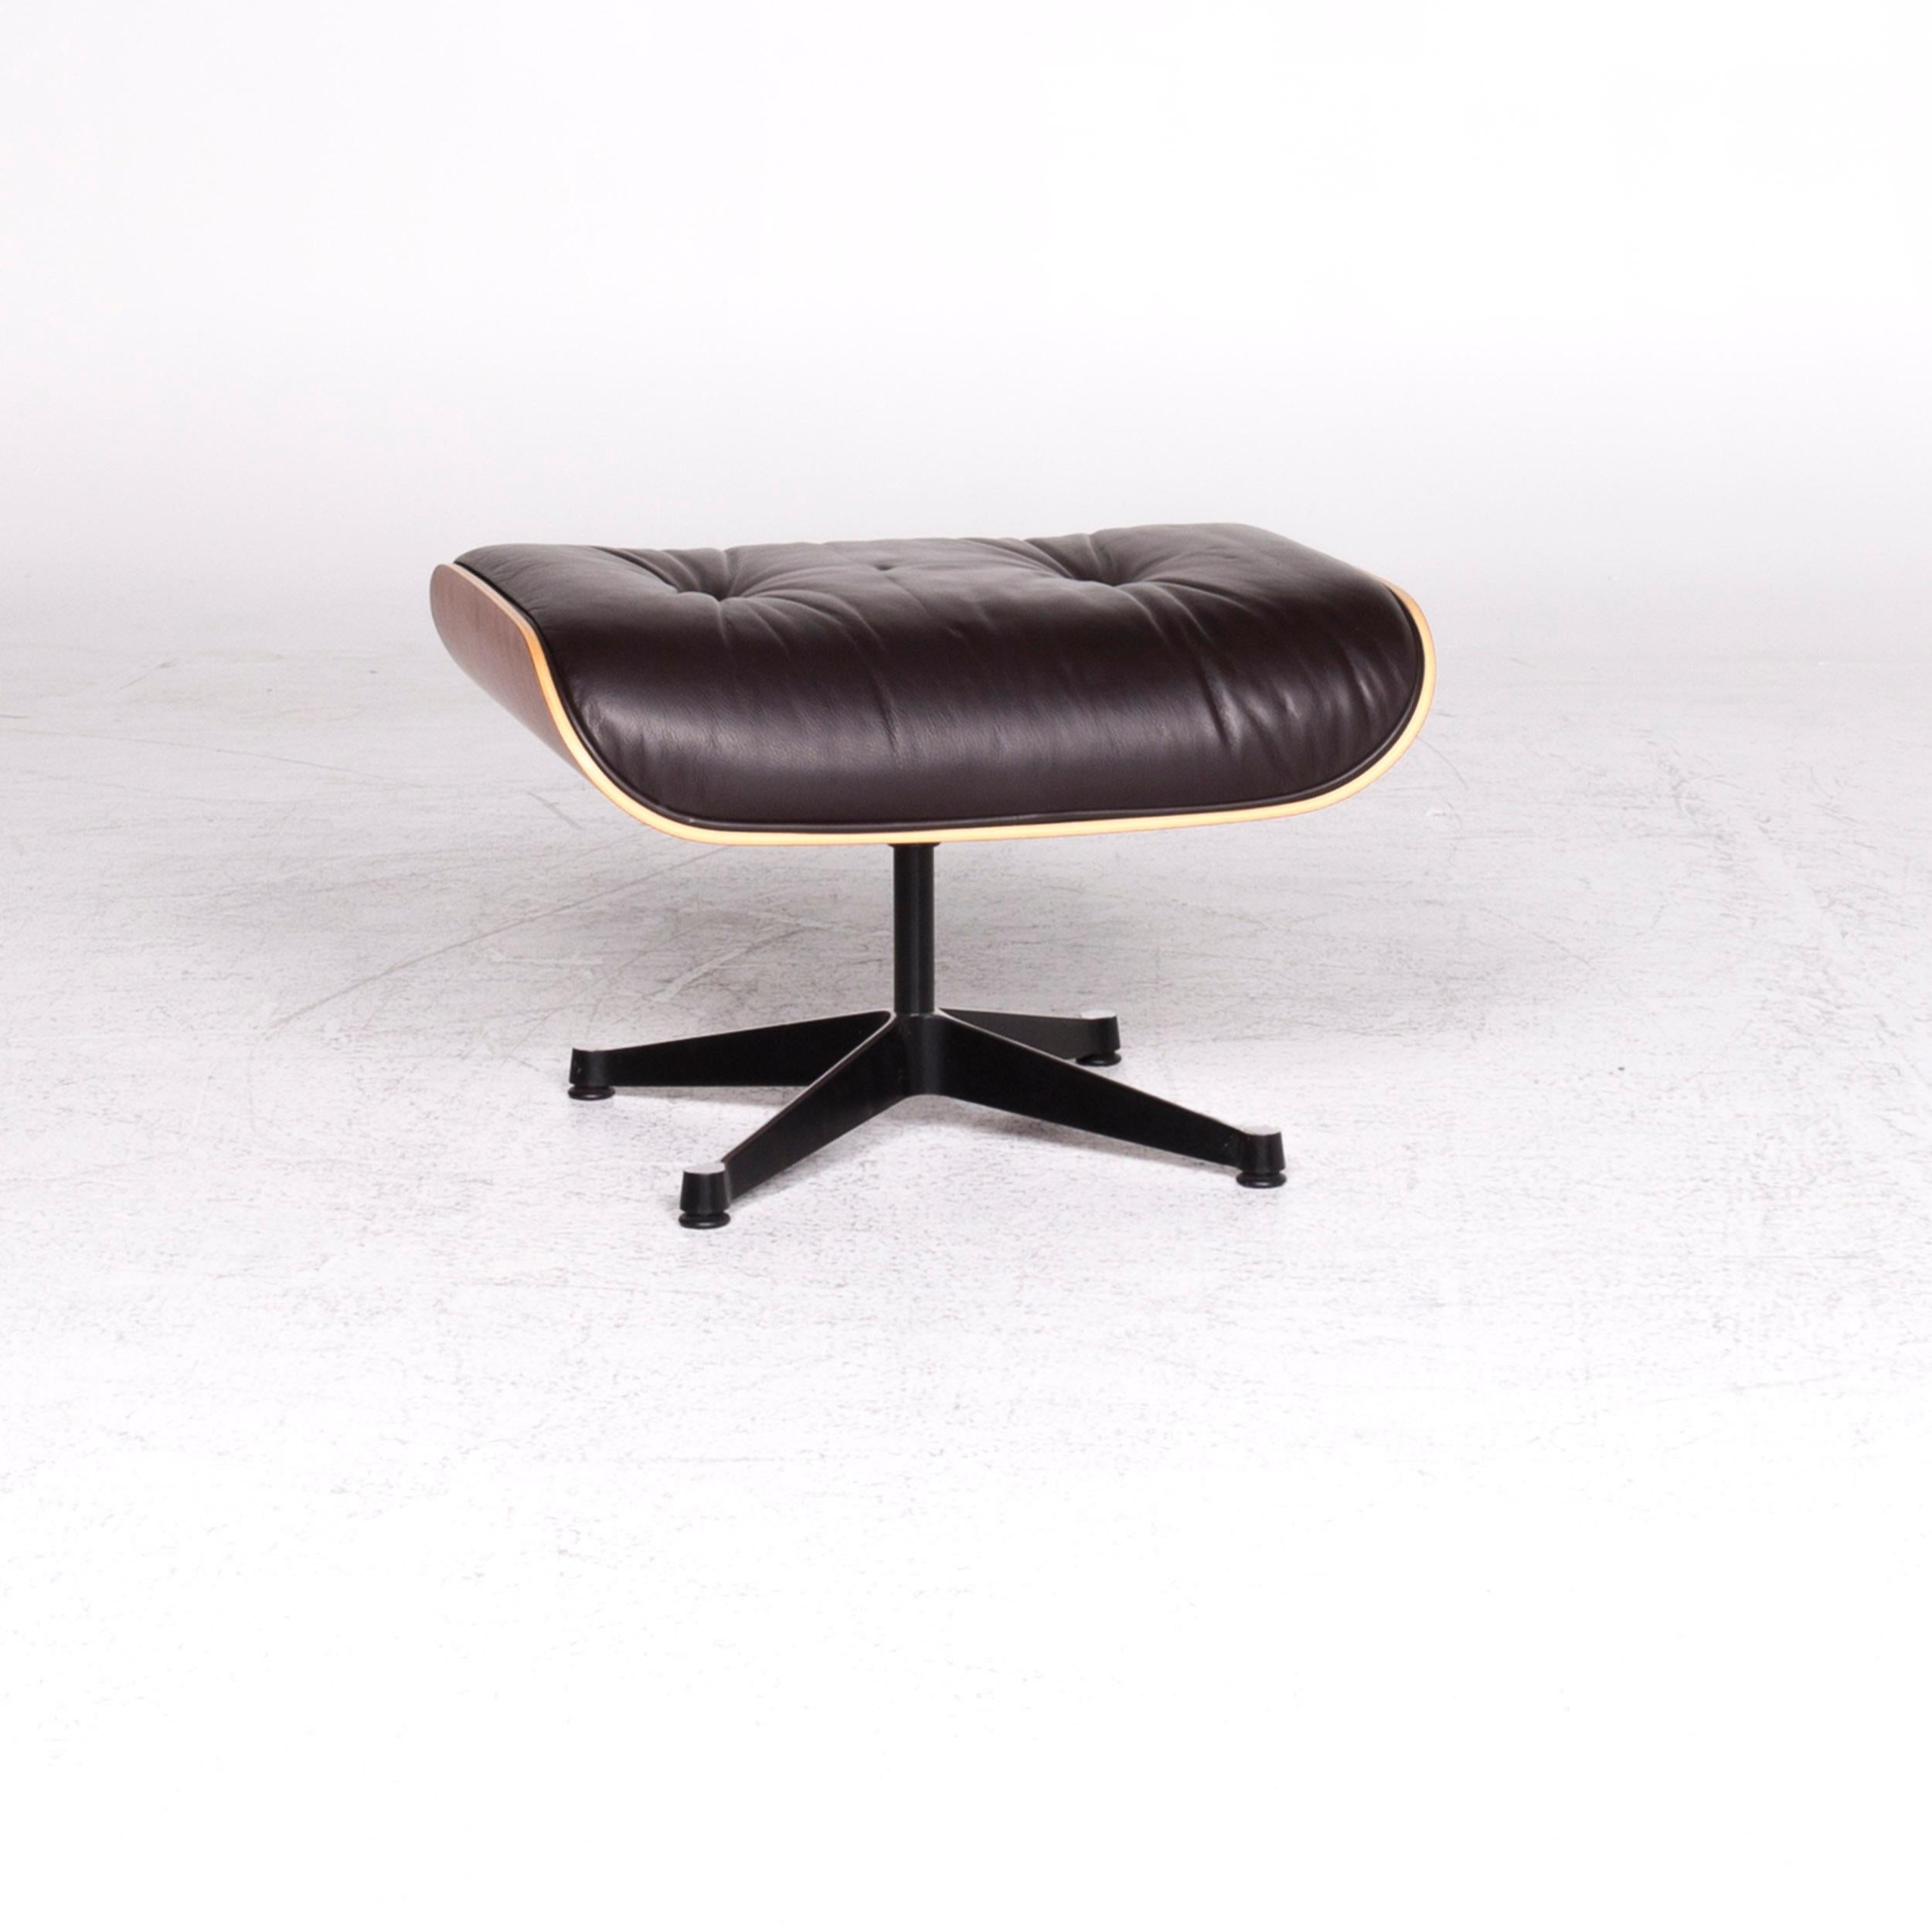 Modern Vitra Eames Lounge Chair Leather Stool Set Brown Charles & Ray Eames Chair For Sale